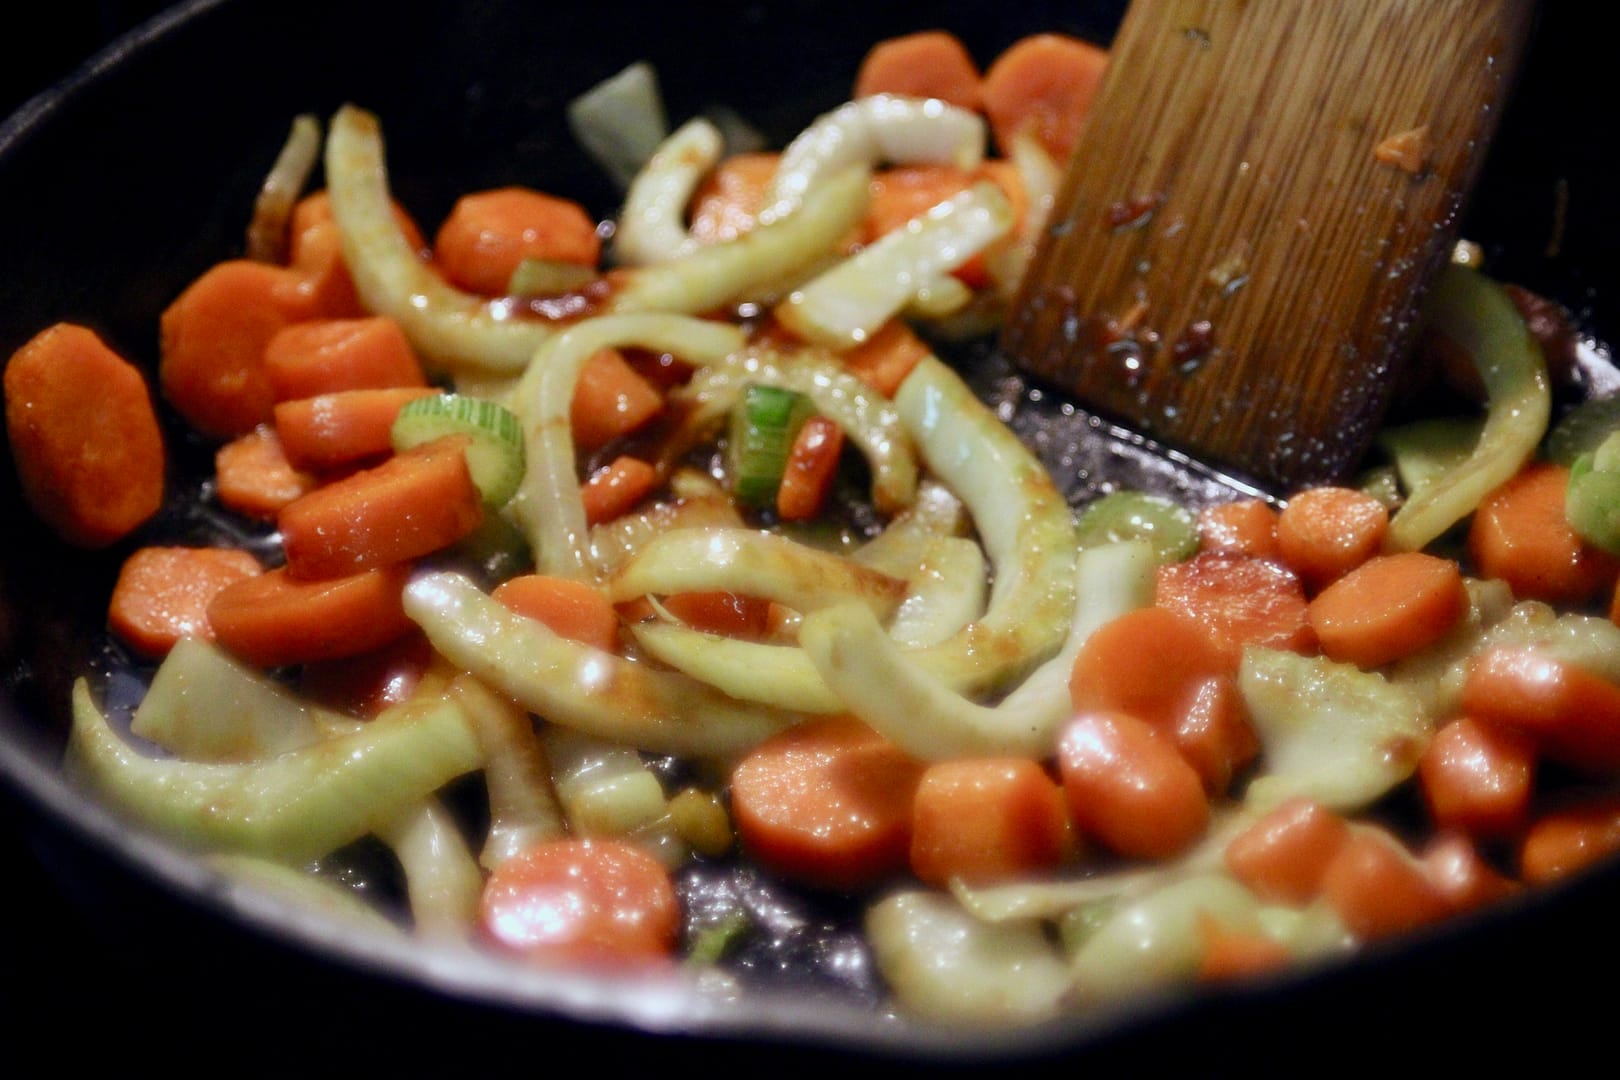 Carrots and fennel being sauteed in a cast iron skillet for the beans and kale.